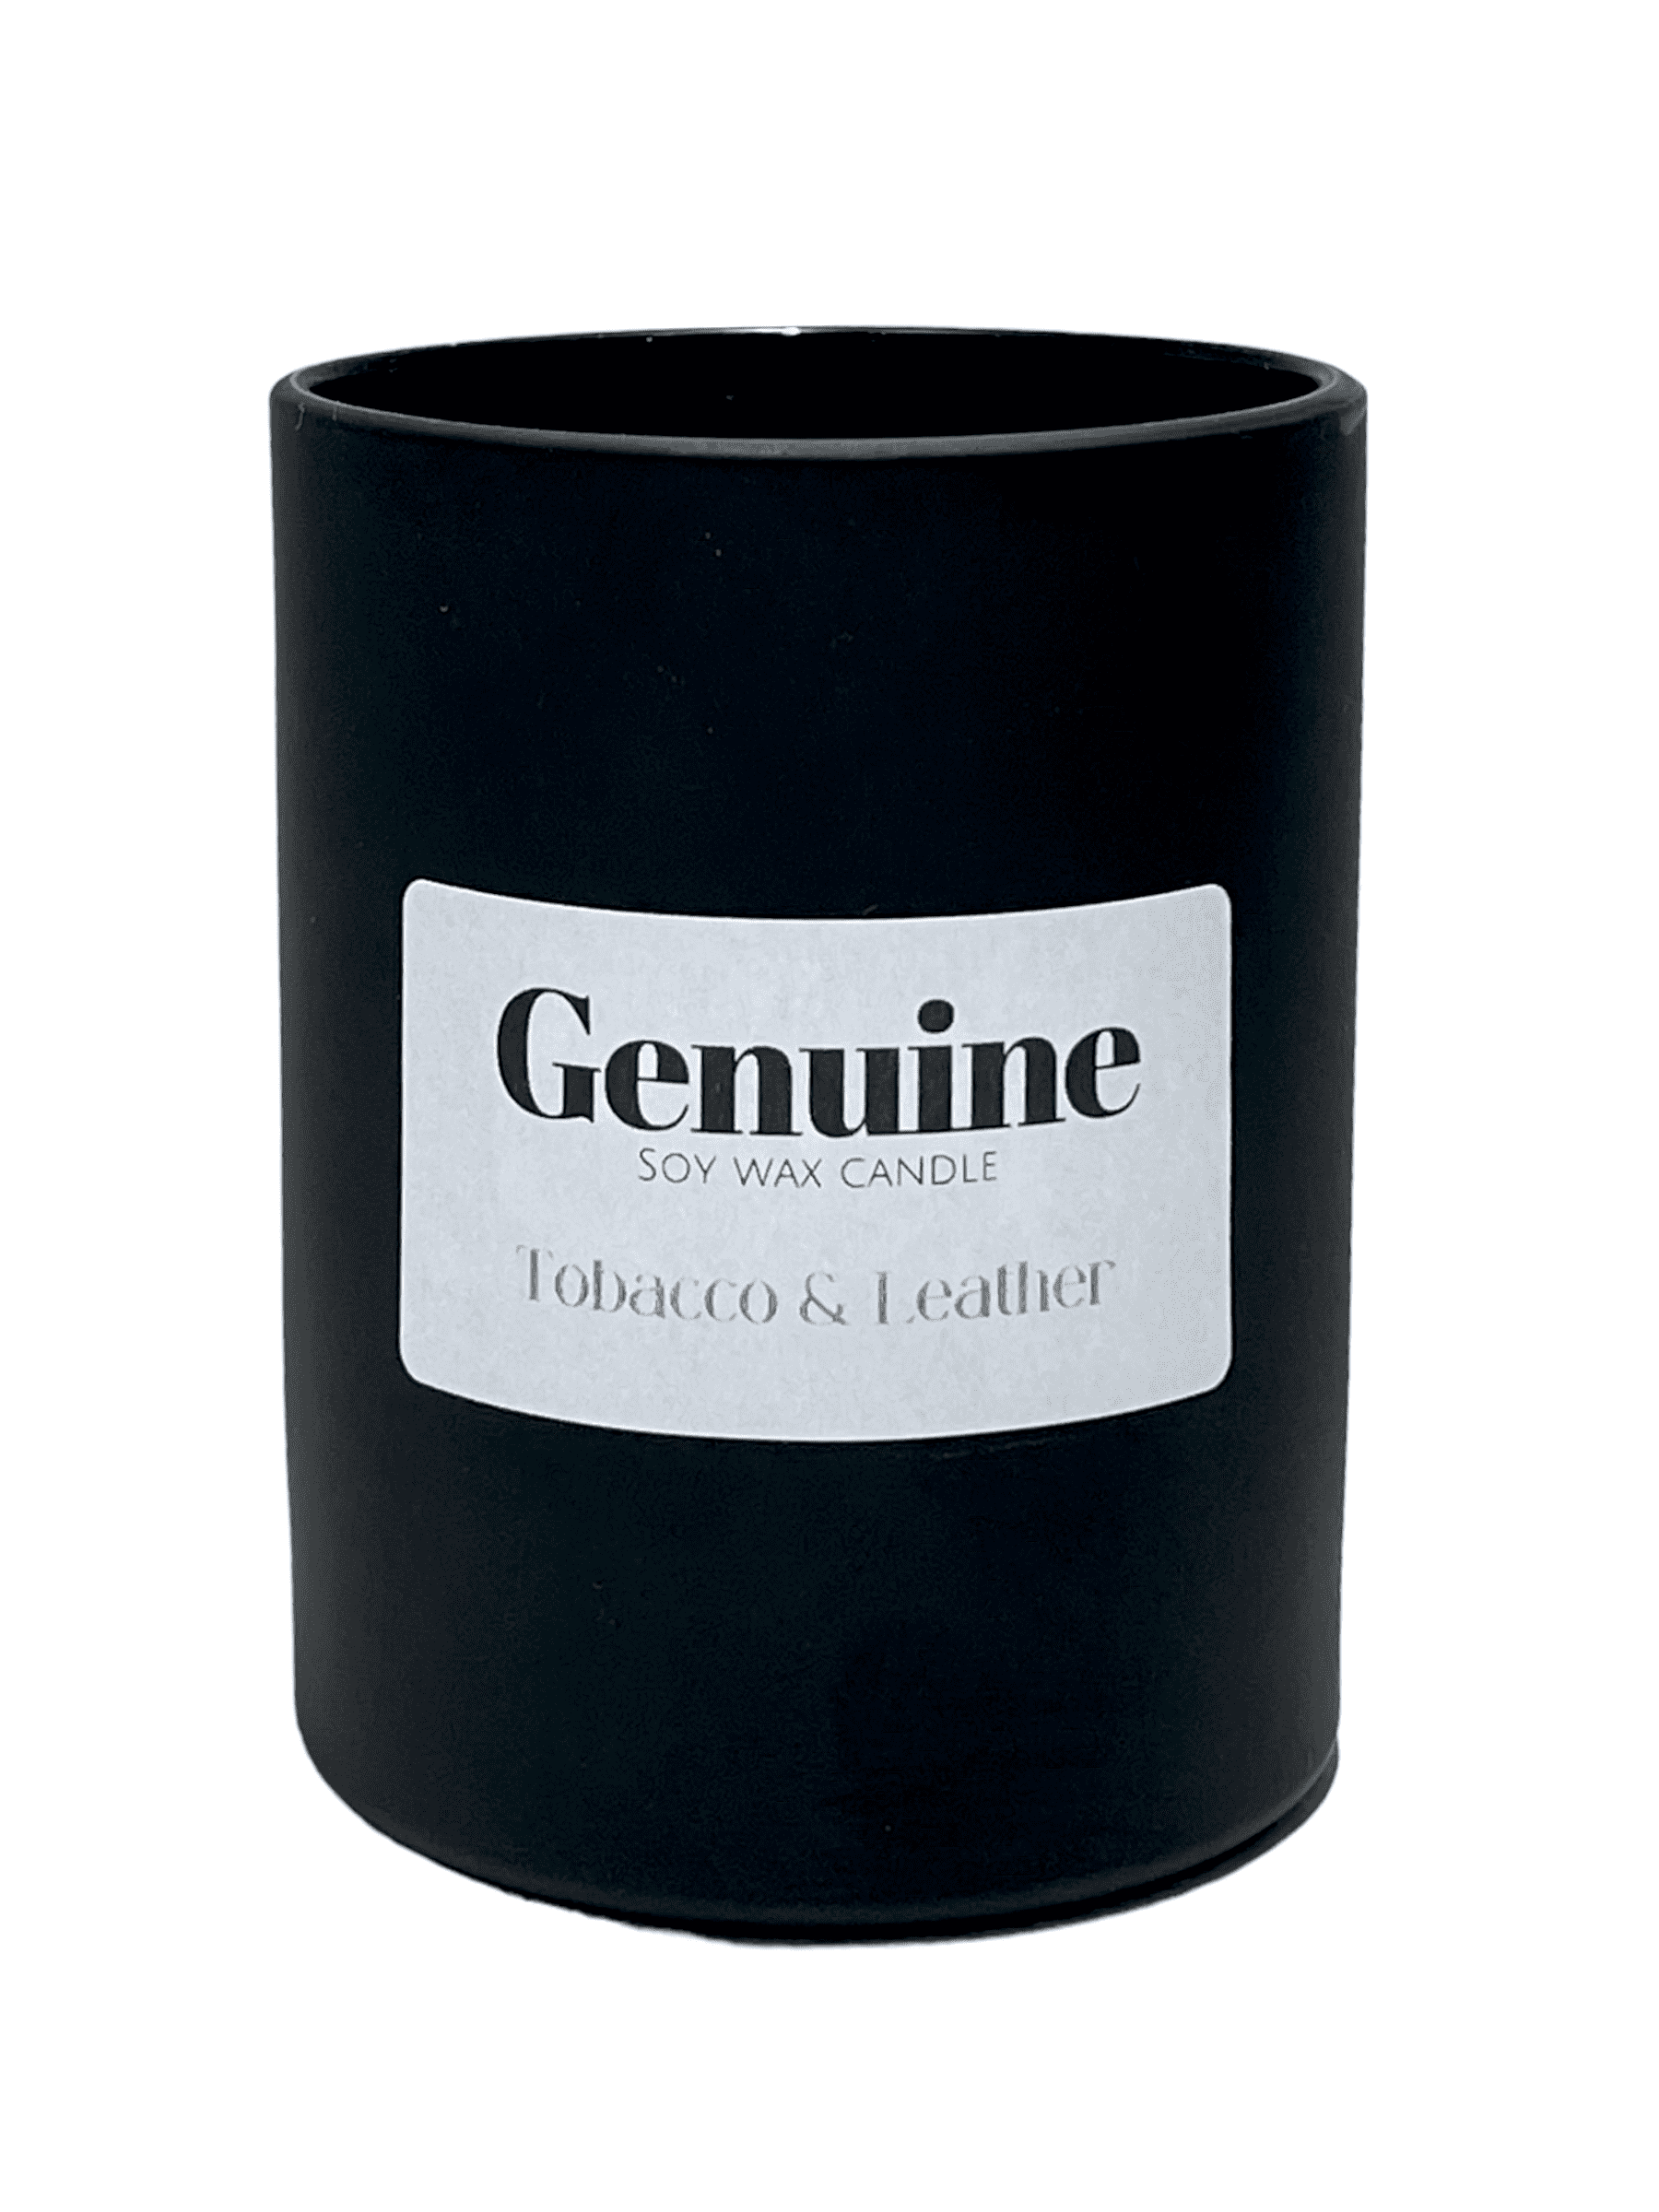 Genuine Design Soy Wax Candle - Tobacco & Leather - Hand Poured in Calgary, Alberta, Canada. Genuine Design Luxury Consignment.